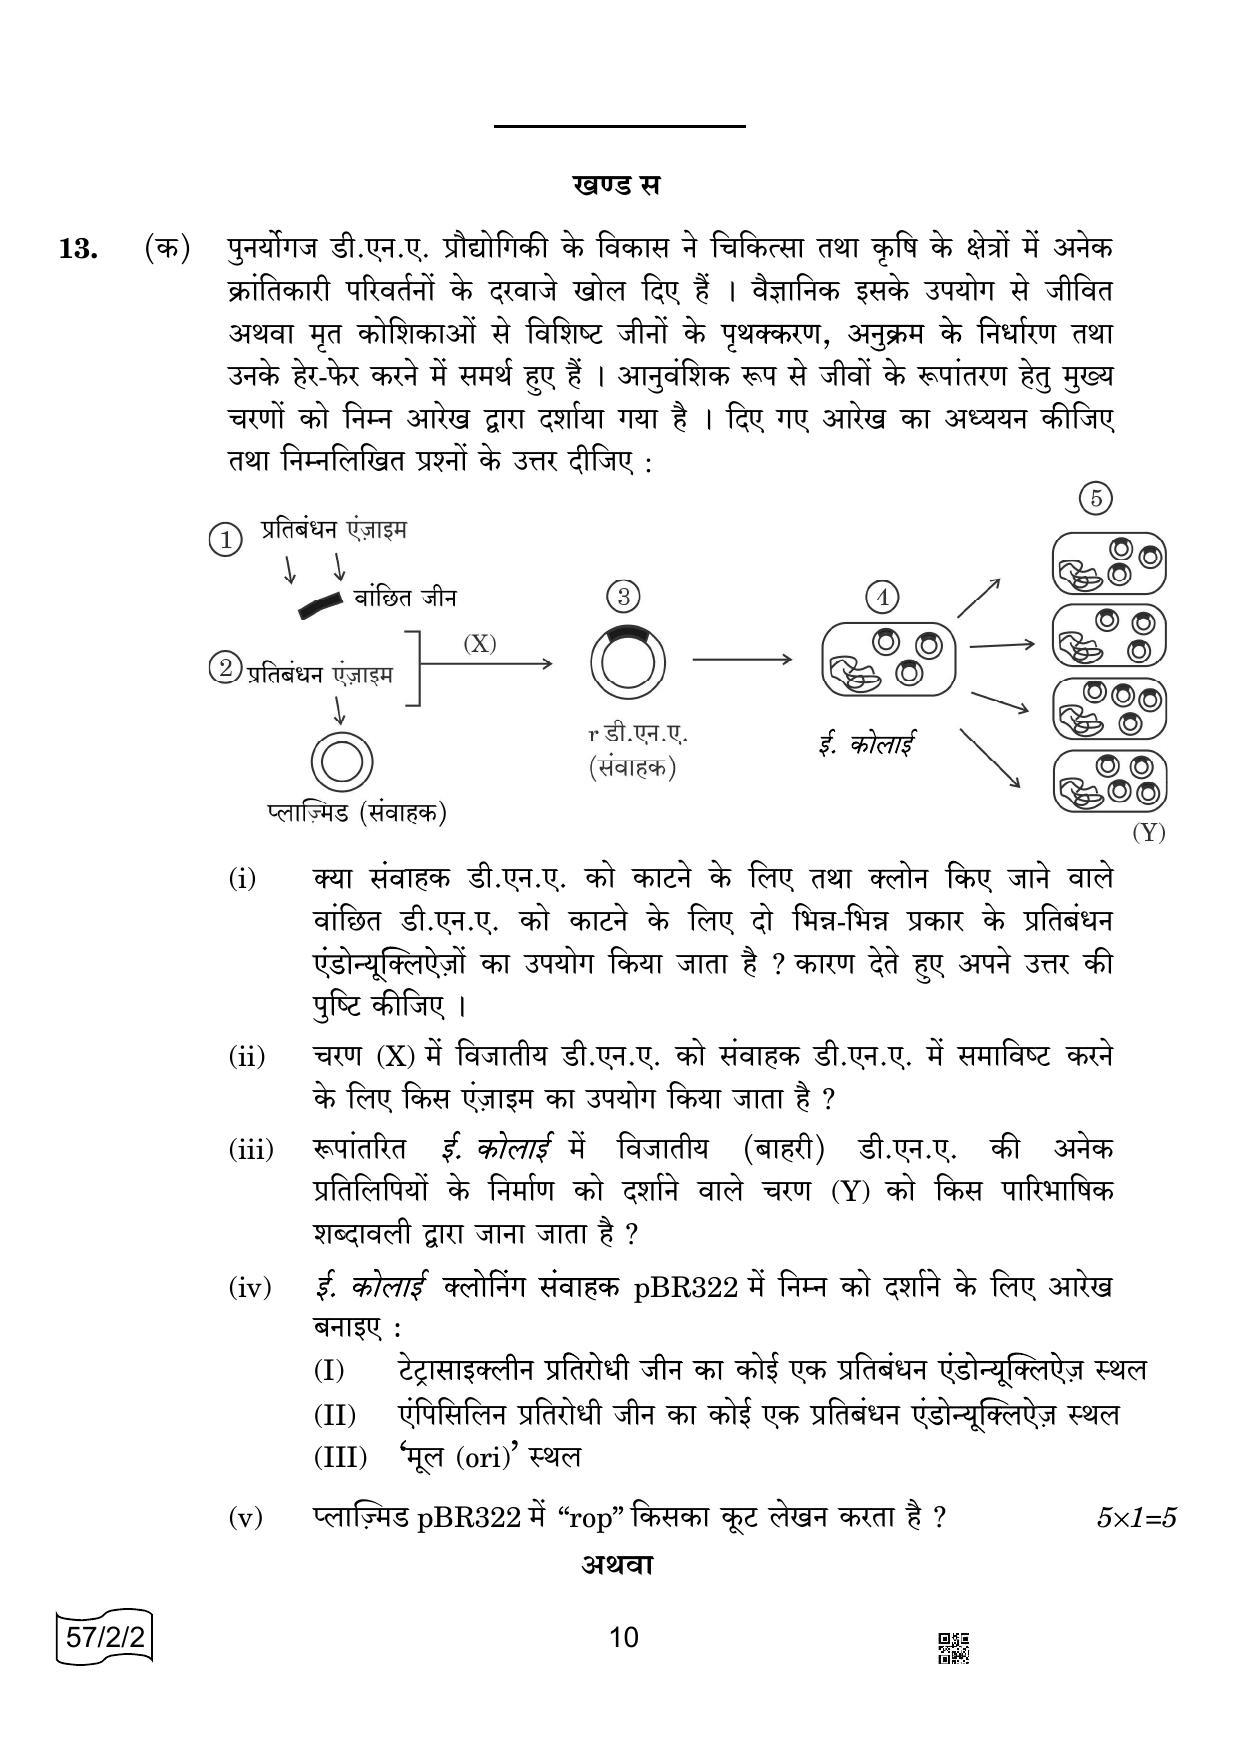 CBSE Class 12 57-2-2 Biology 2022 Question Paper - Page 10